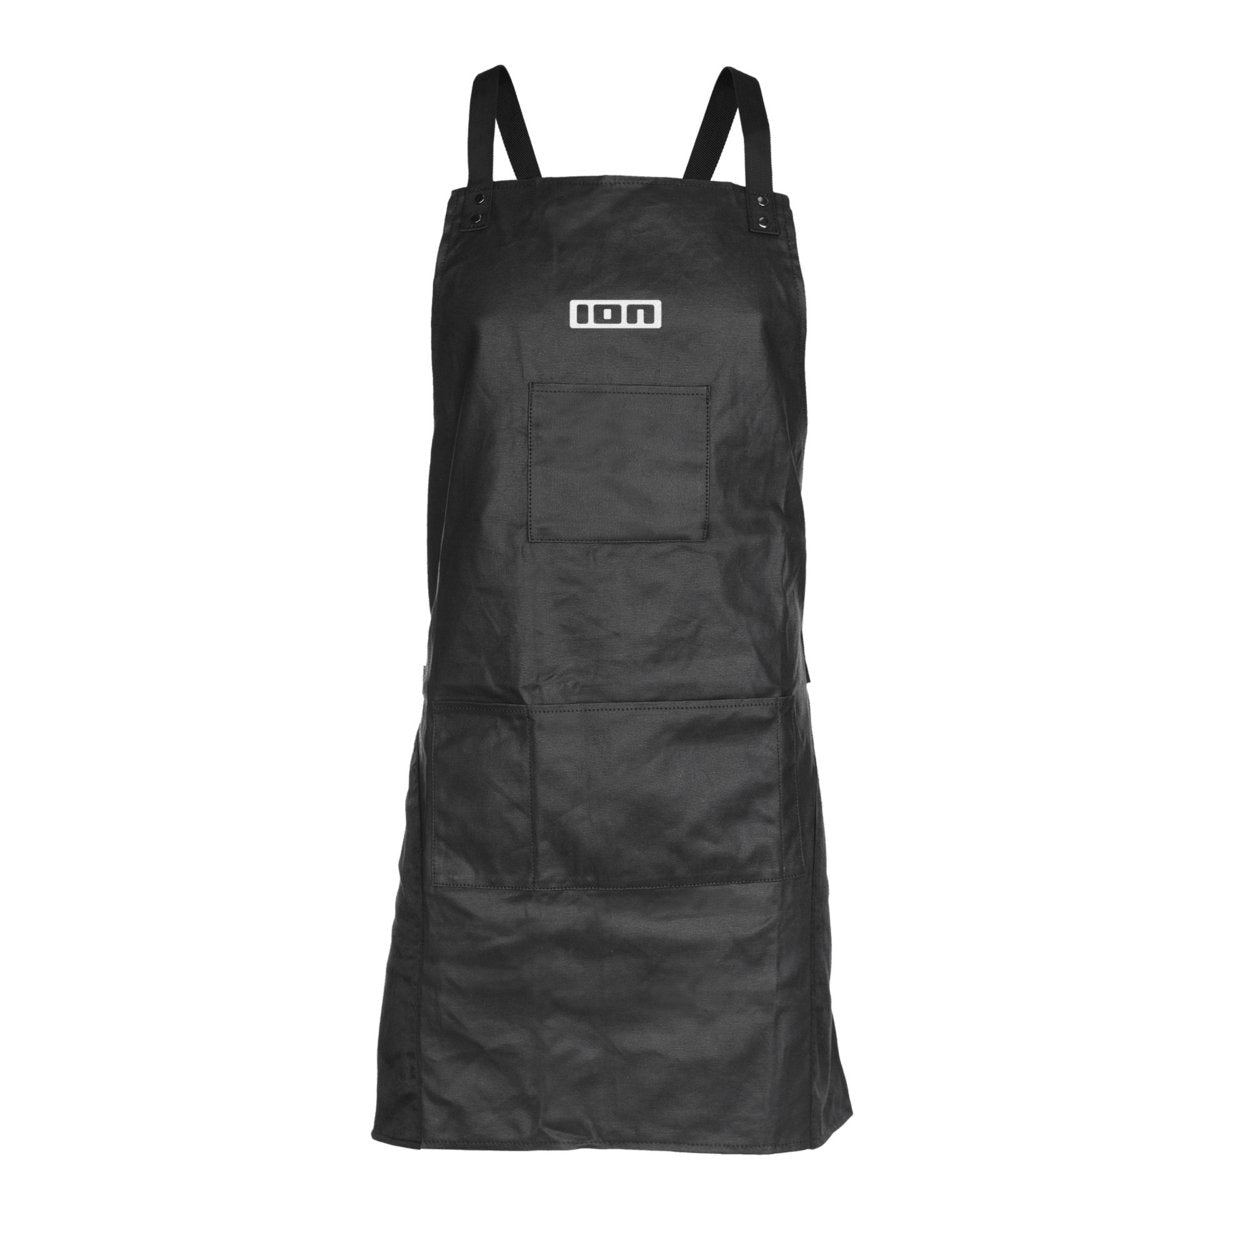 ION Apron 2023 - Worthing Watersports - 9008415531615 - Accessories - ION Bike